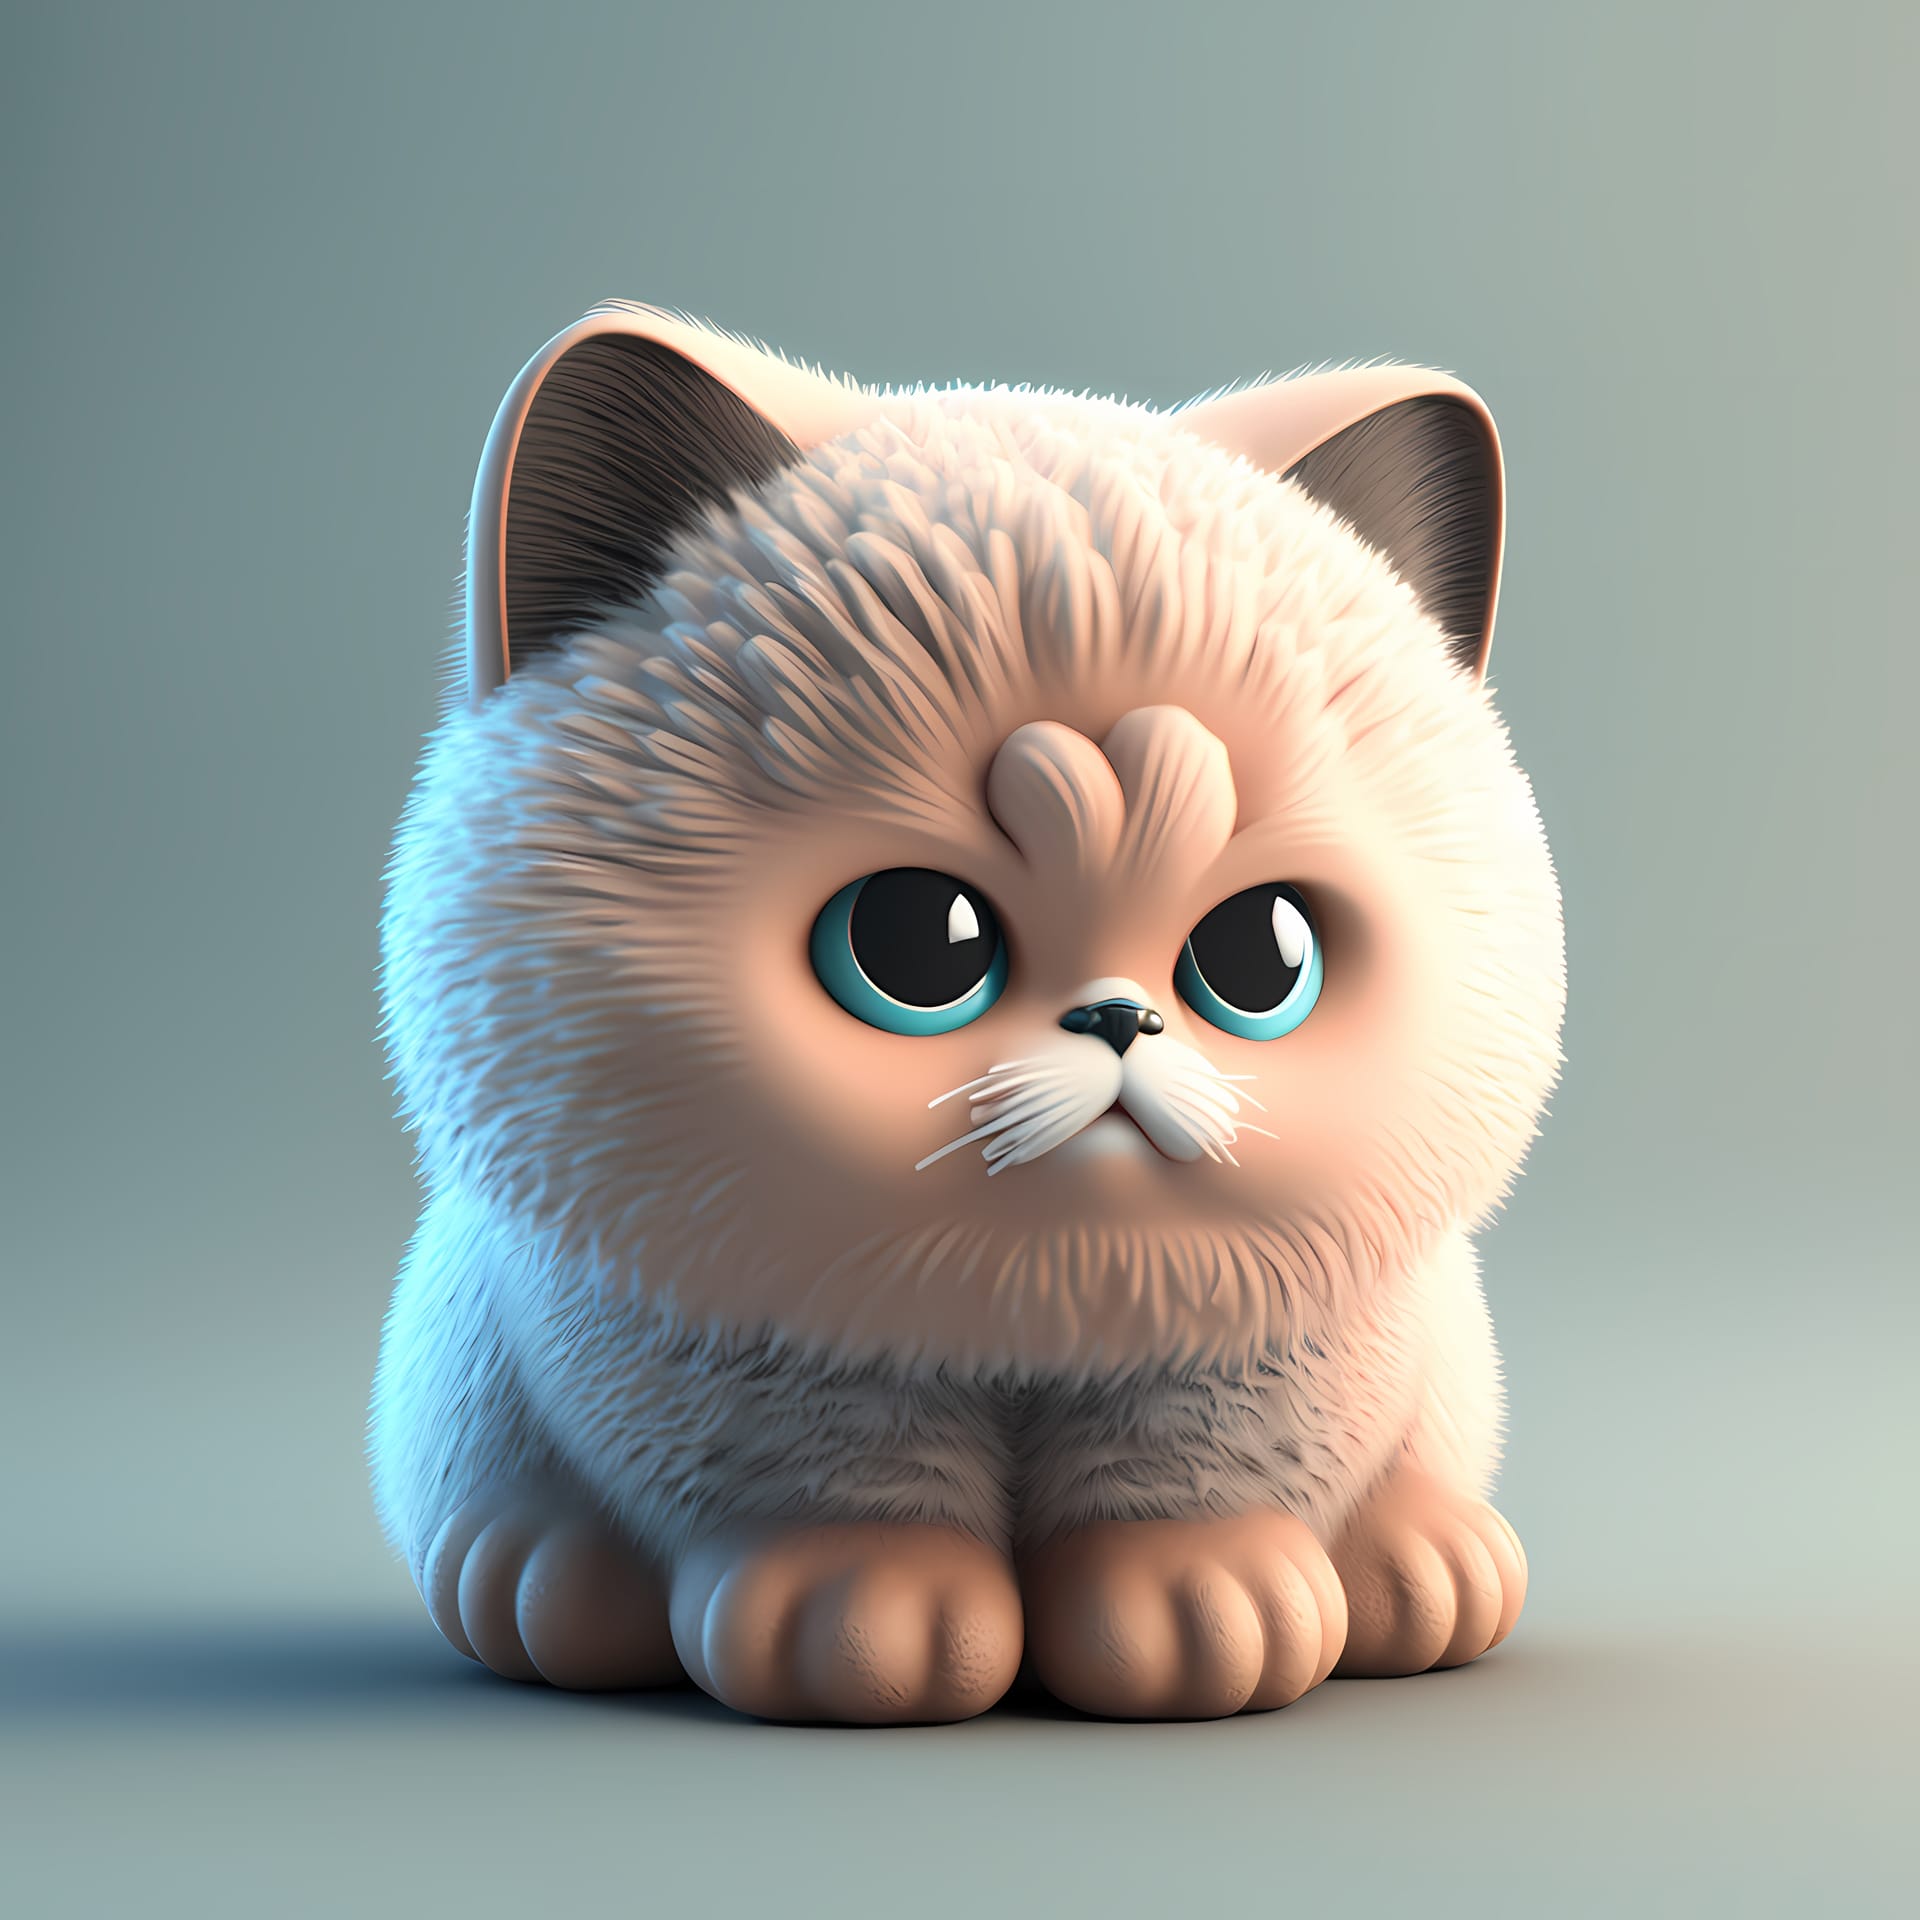 Adorable cute chubby cat 3d render captivating image